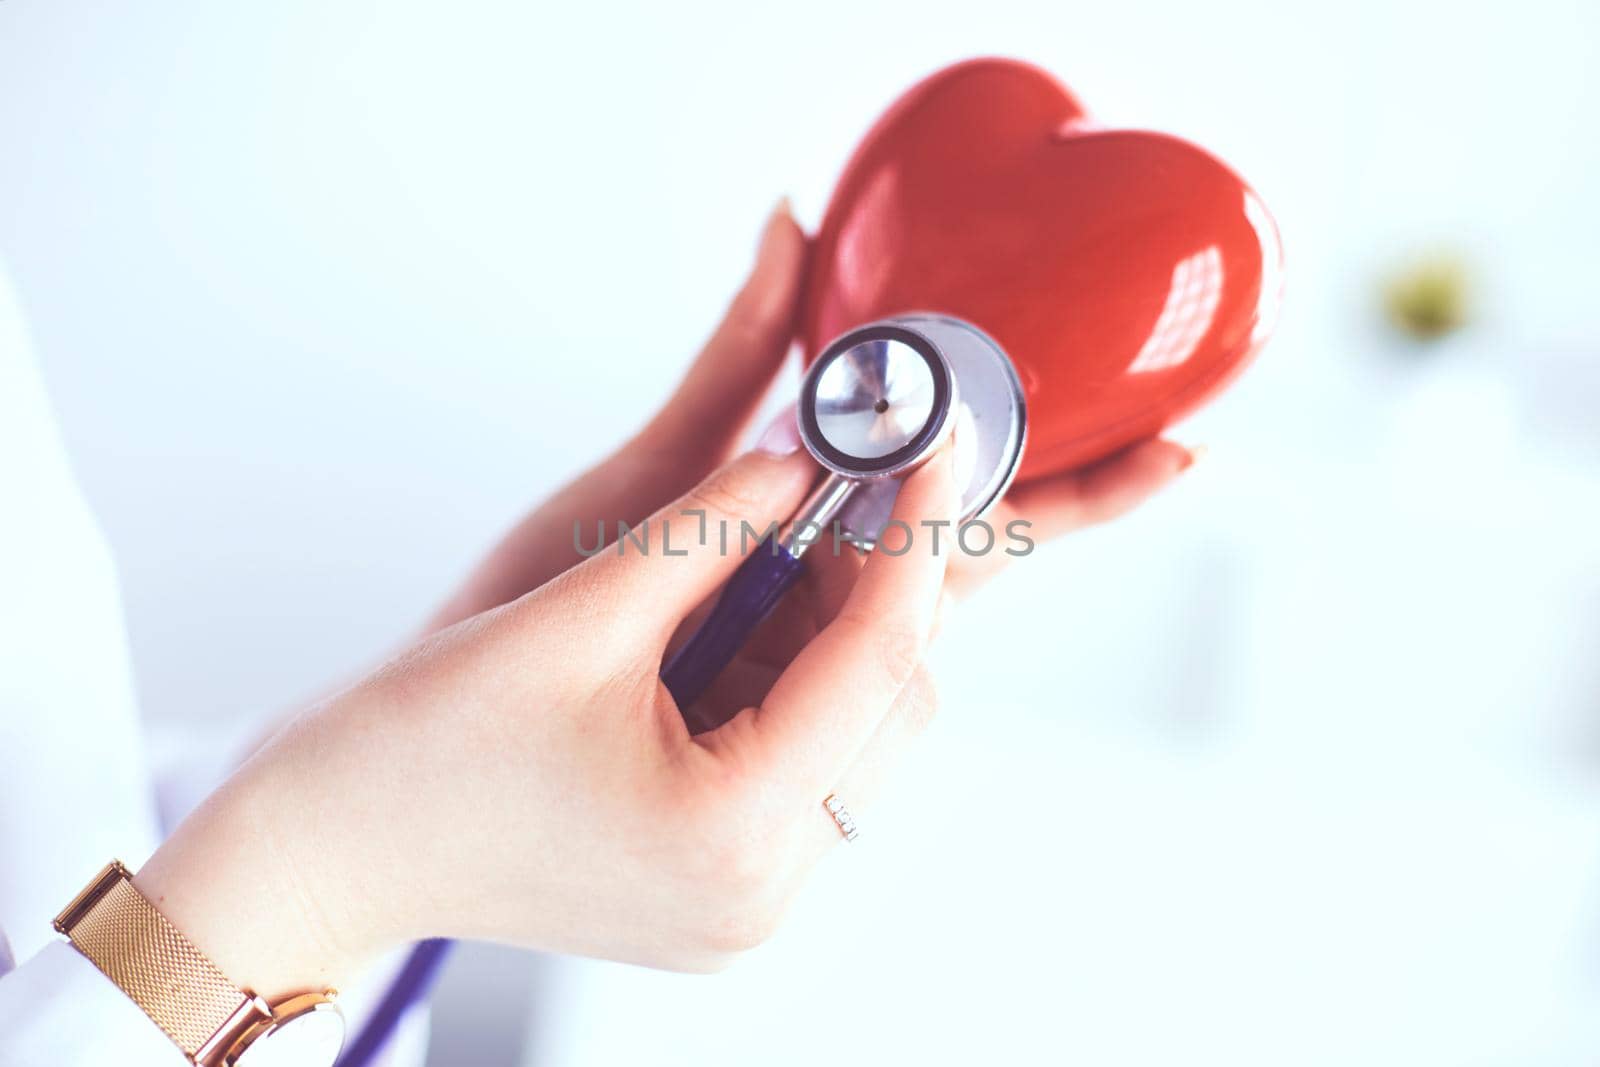 A doctor with stethoscope examining red heart, isolated on white background by lenets